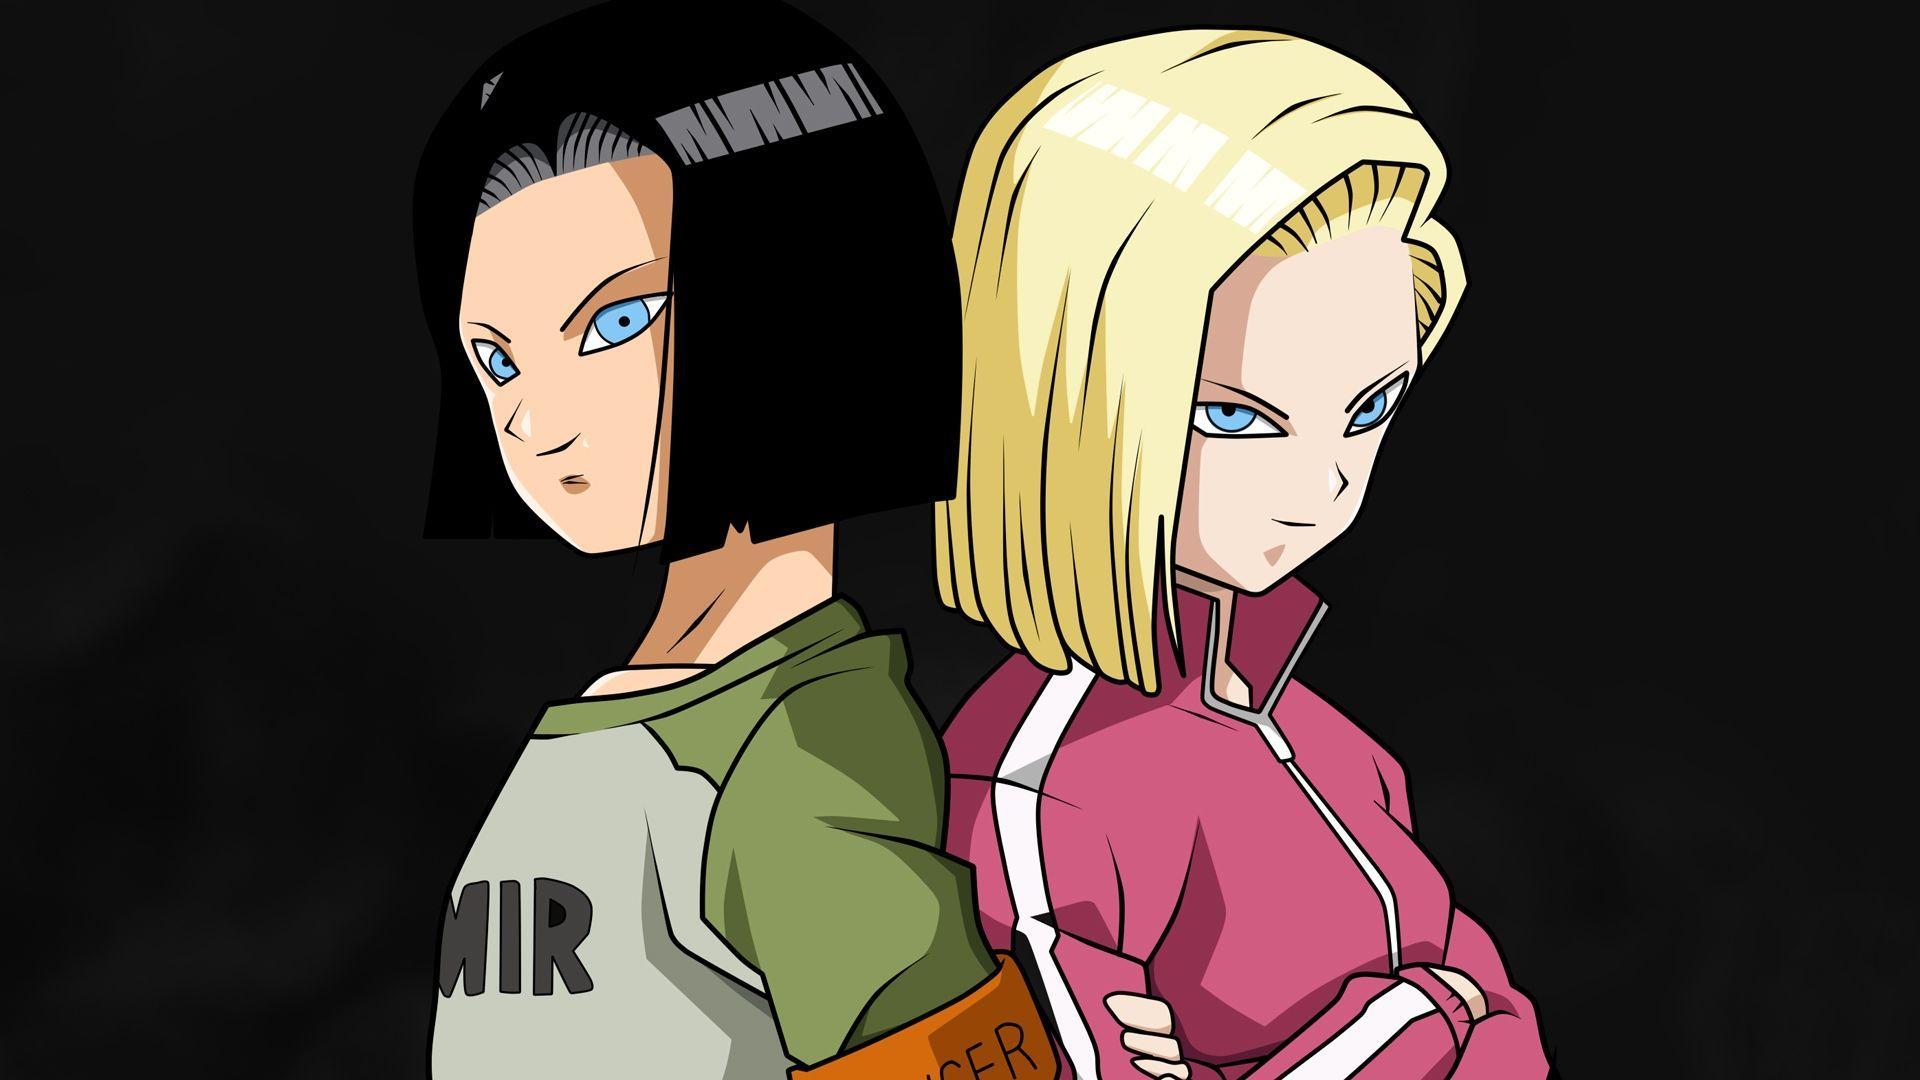 Android 18 Wallpapers - Wallpaper Cave.